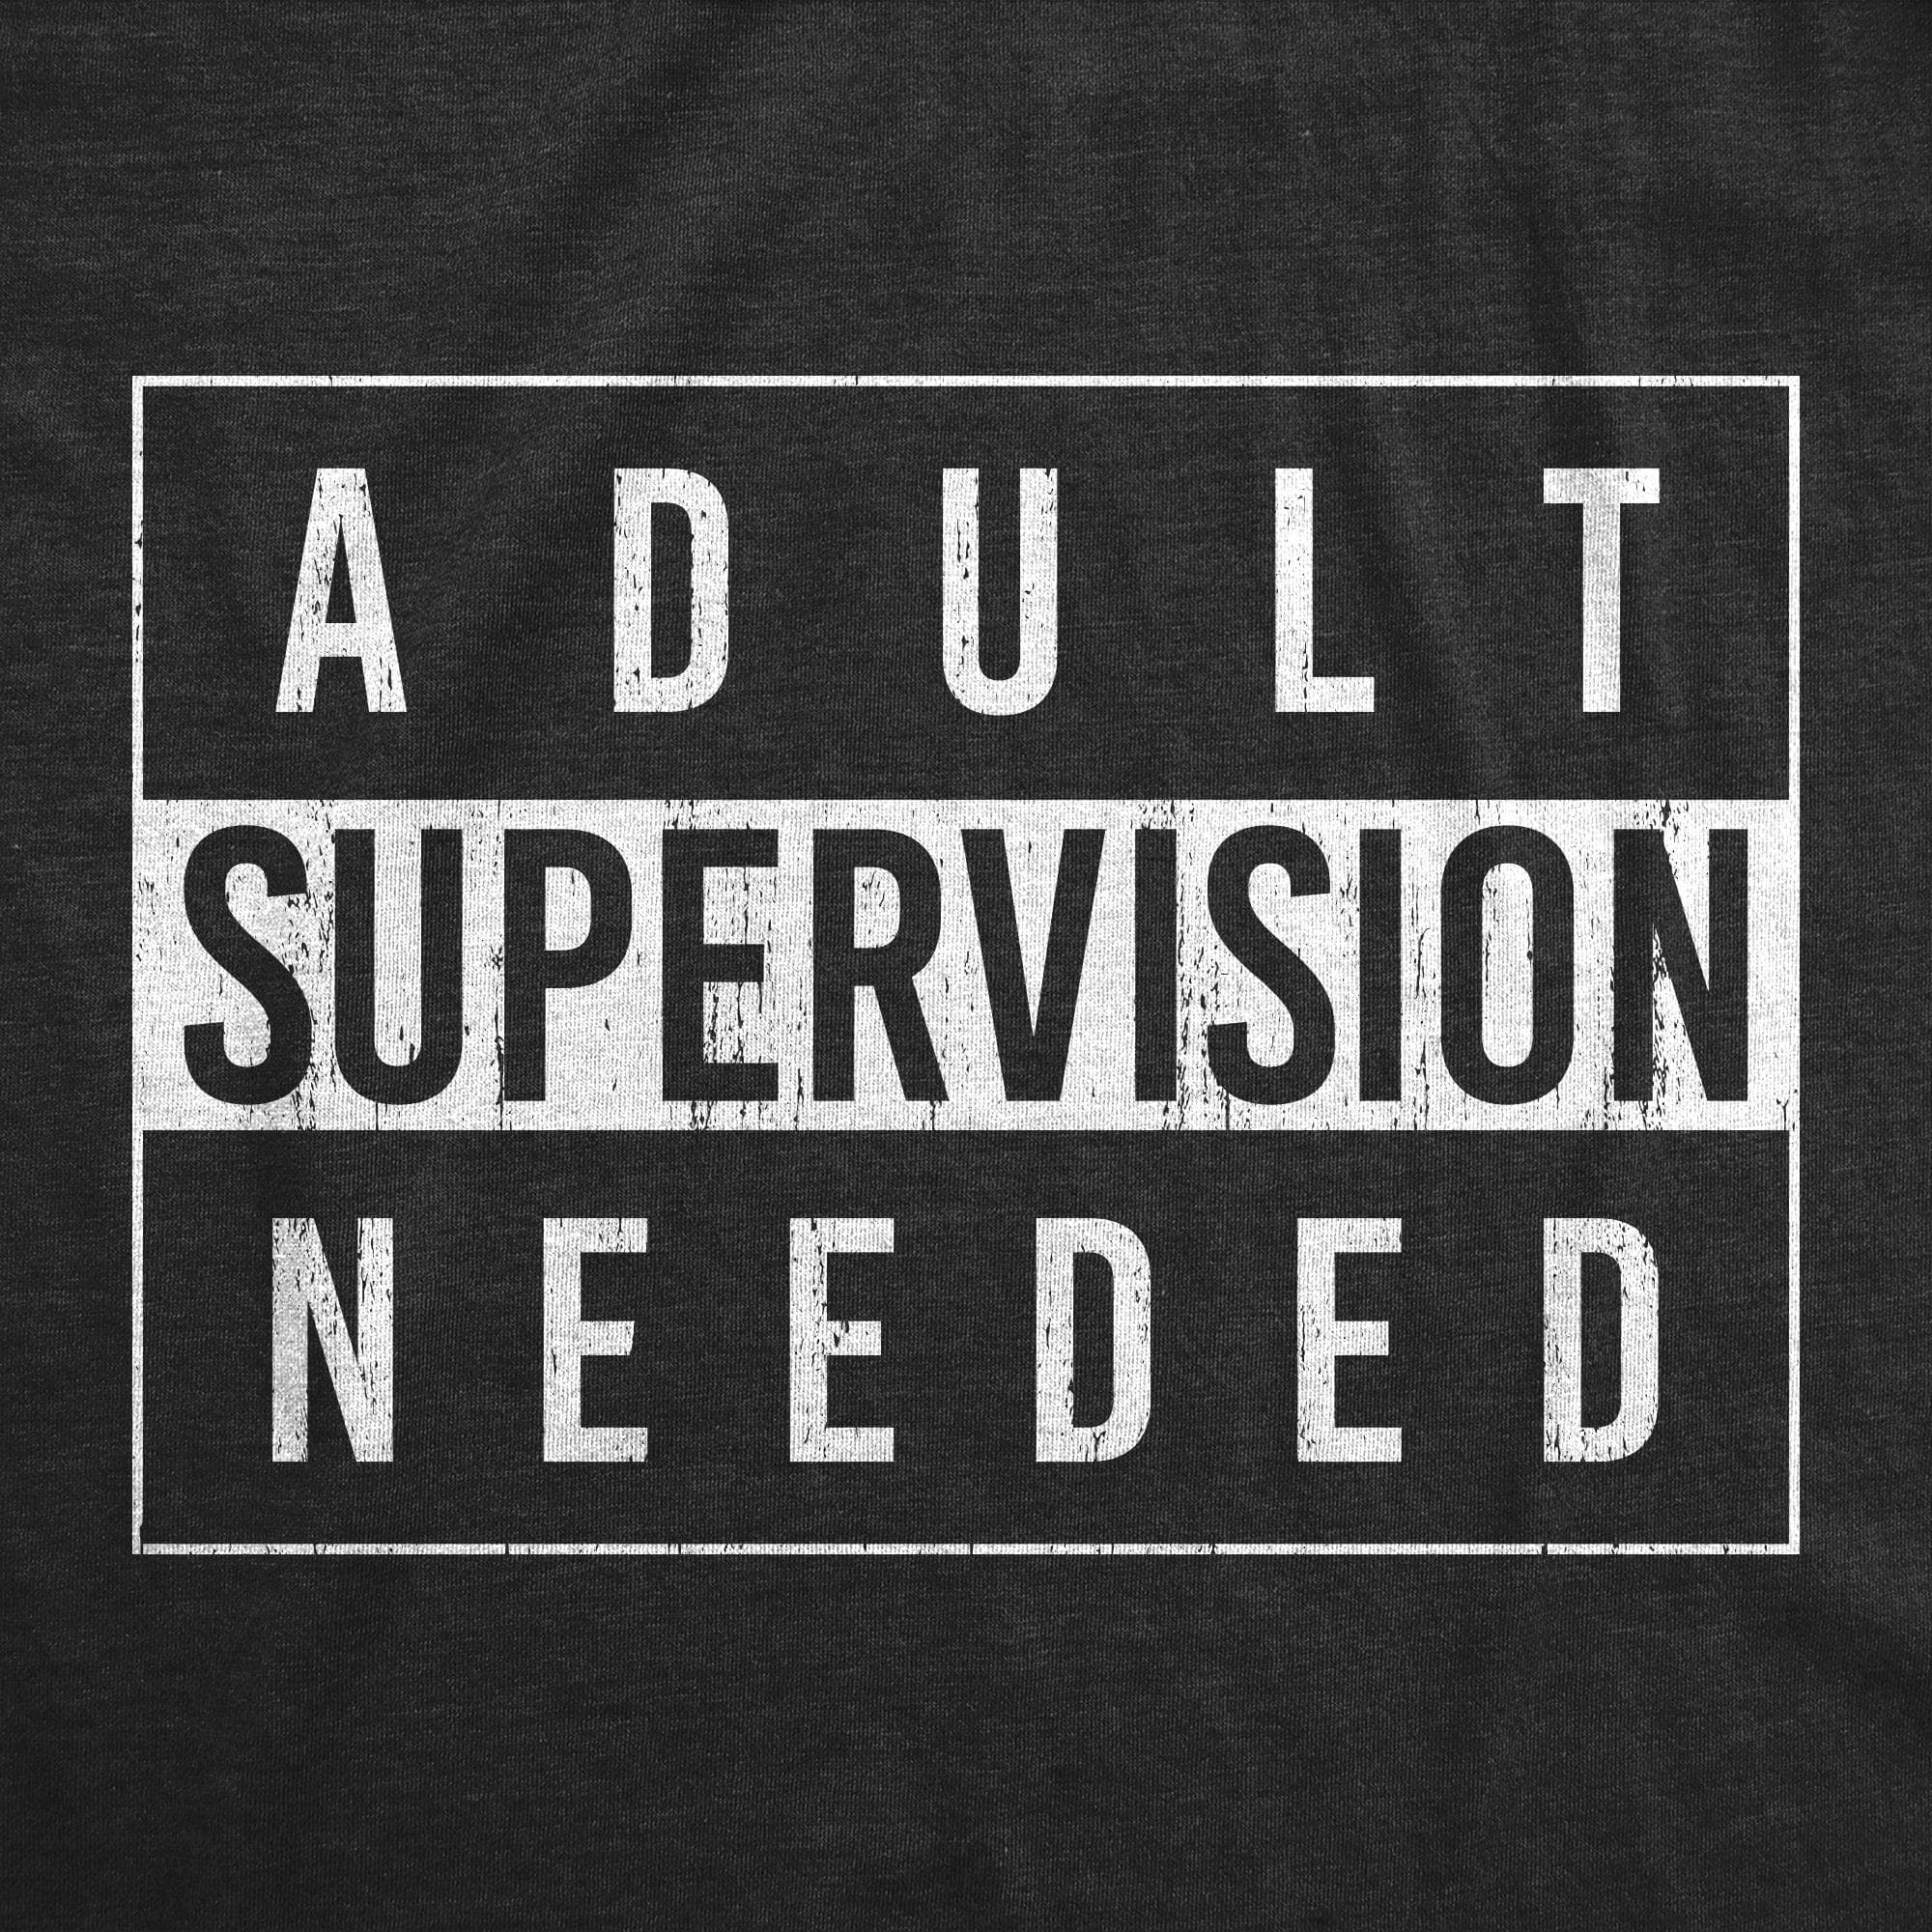 Adult Supervision Needed Women's Tshirt  -  Crazy Dog T-Shirts